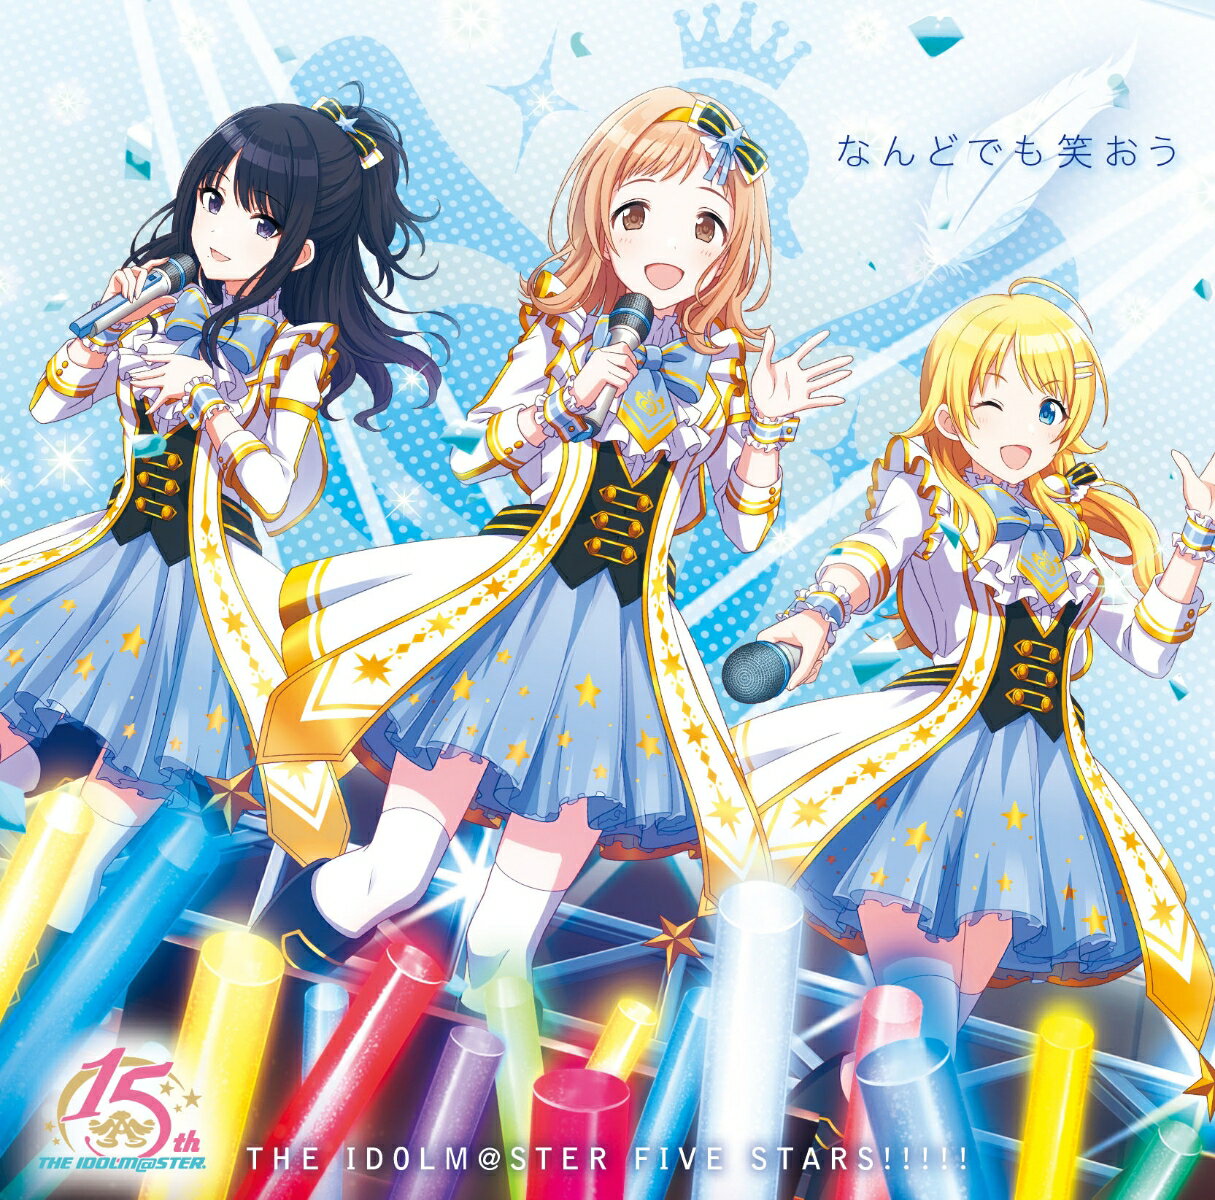 THE IDOLM@STERシリーズ15周年記念曲「なんどでも笑おう」 【シャイニーカラーズ盤】 THE IDOLM@STER FIVE STARS